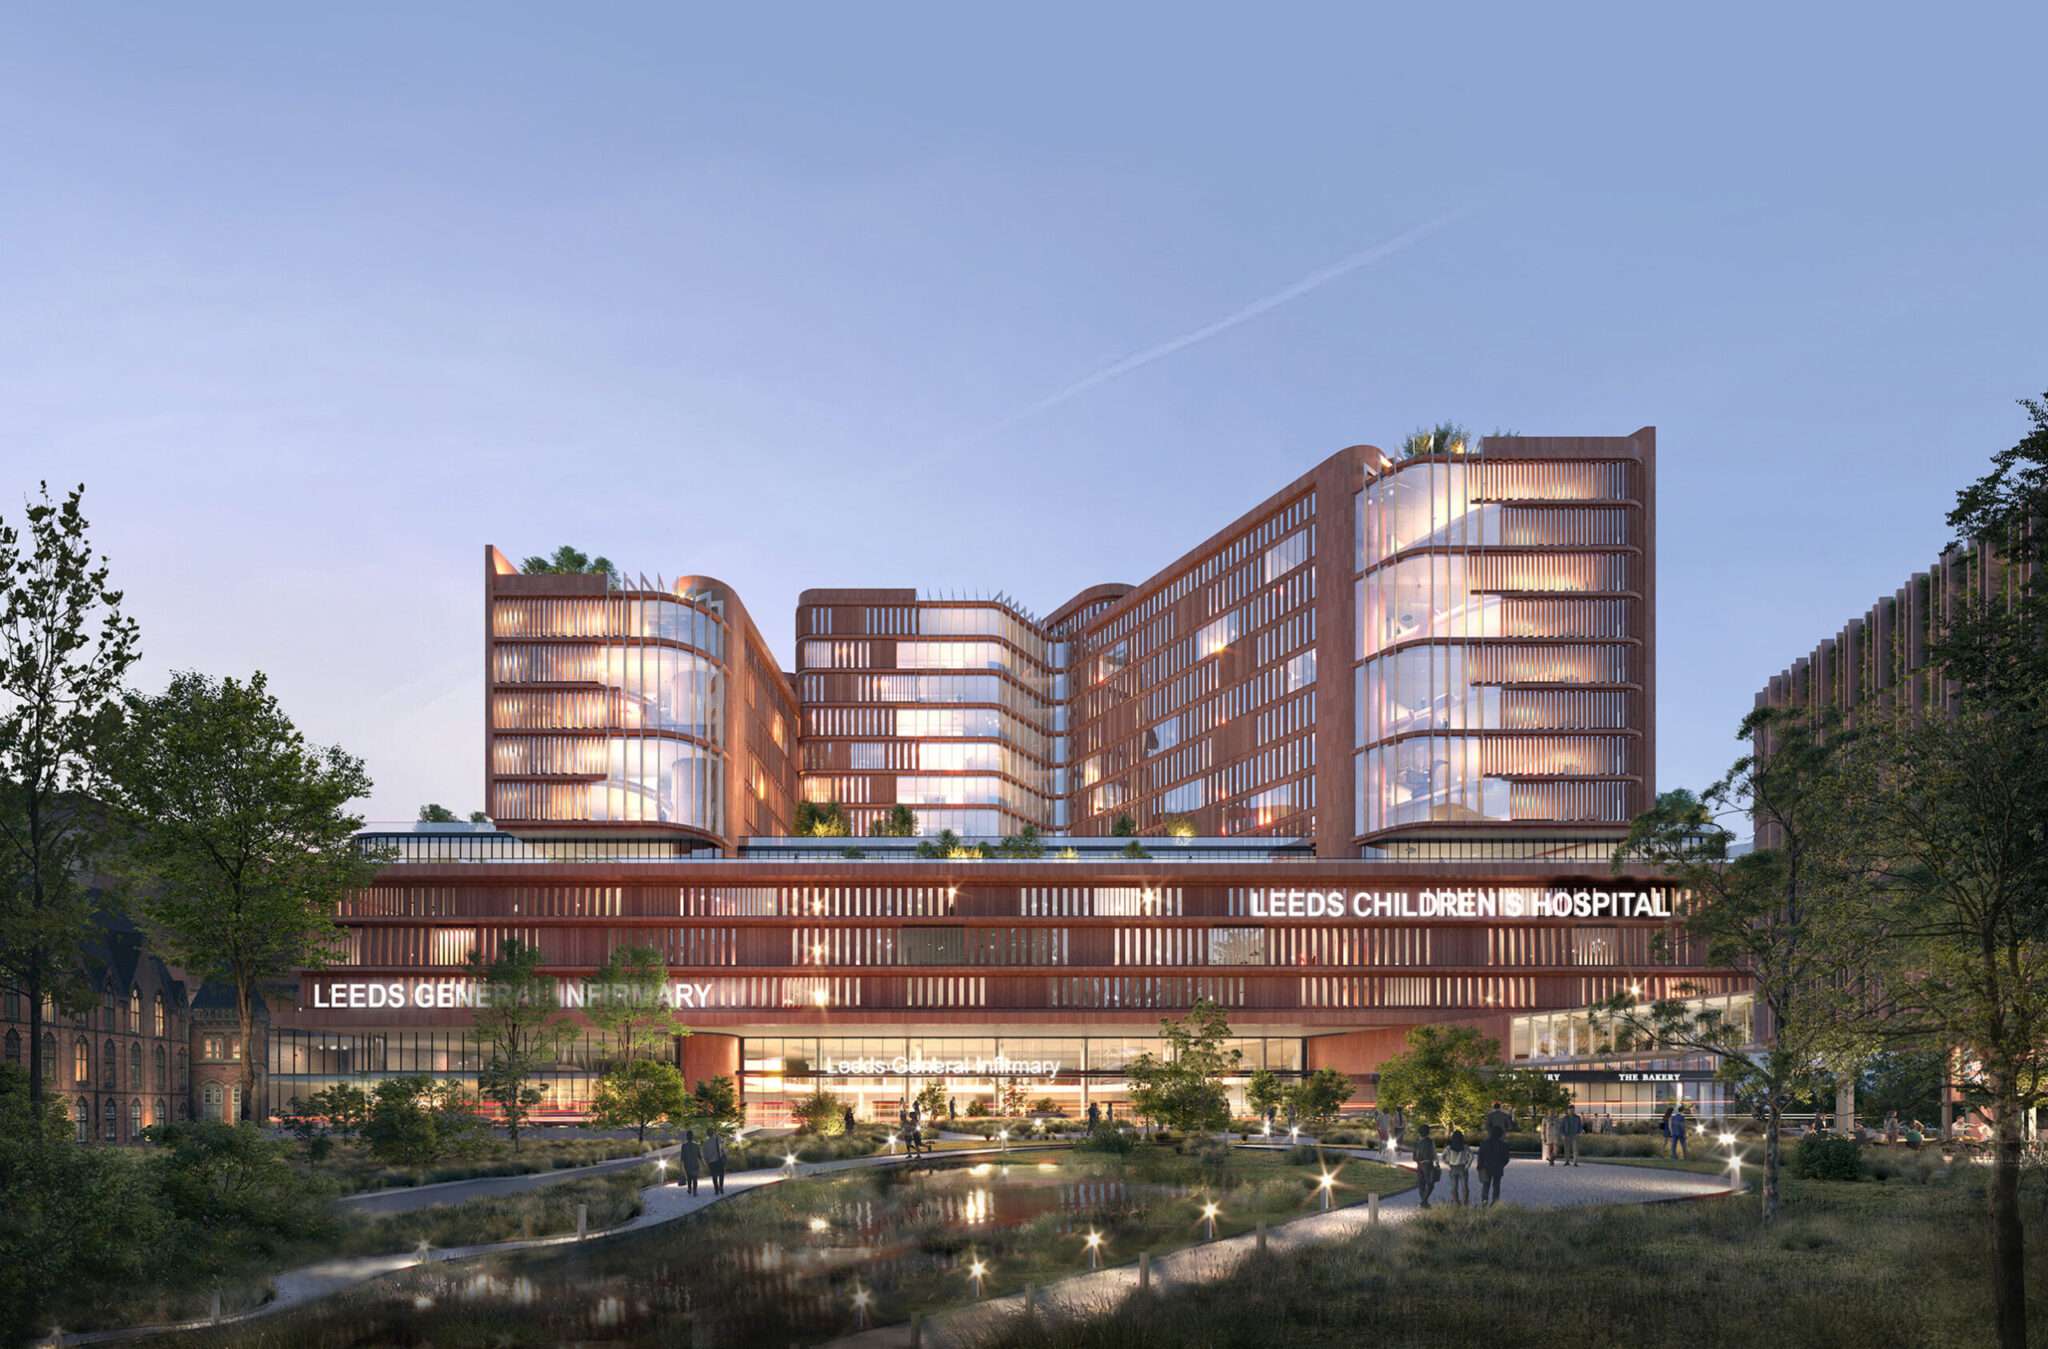 Concept picture of the new Leeds Teaching Children's Hospital.